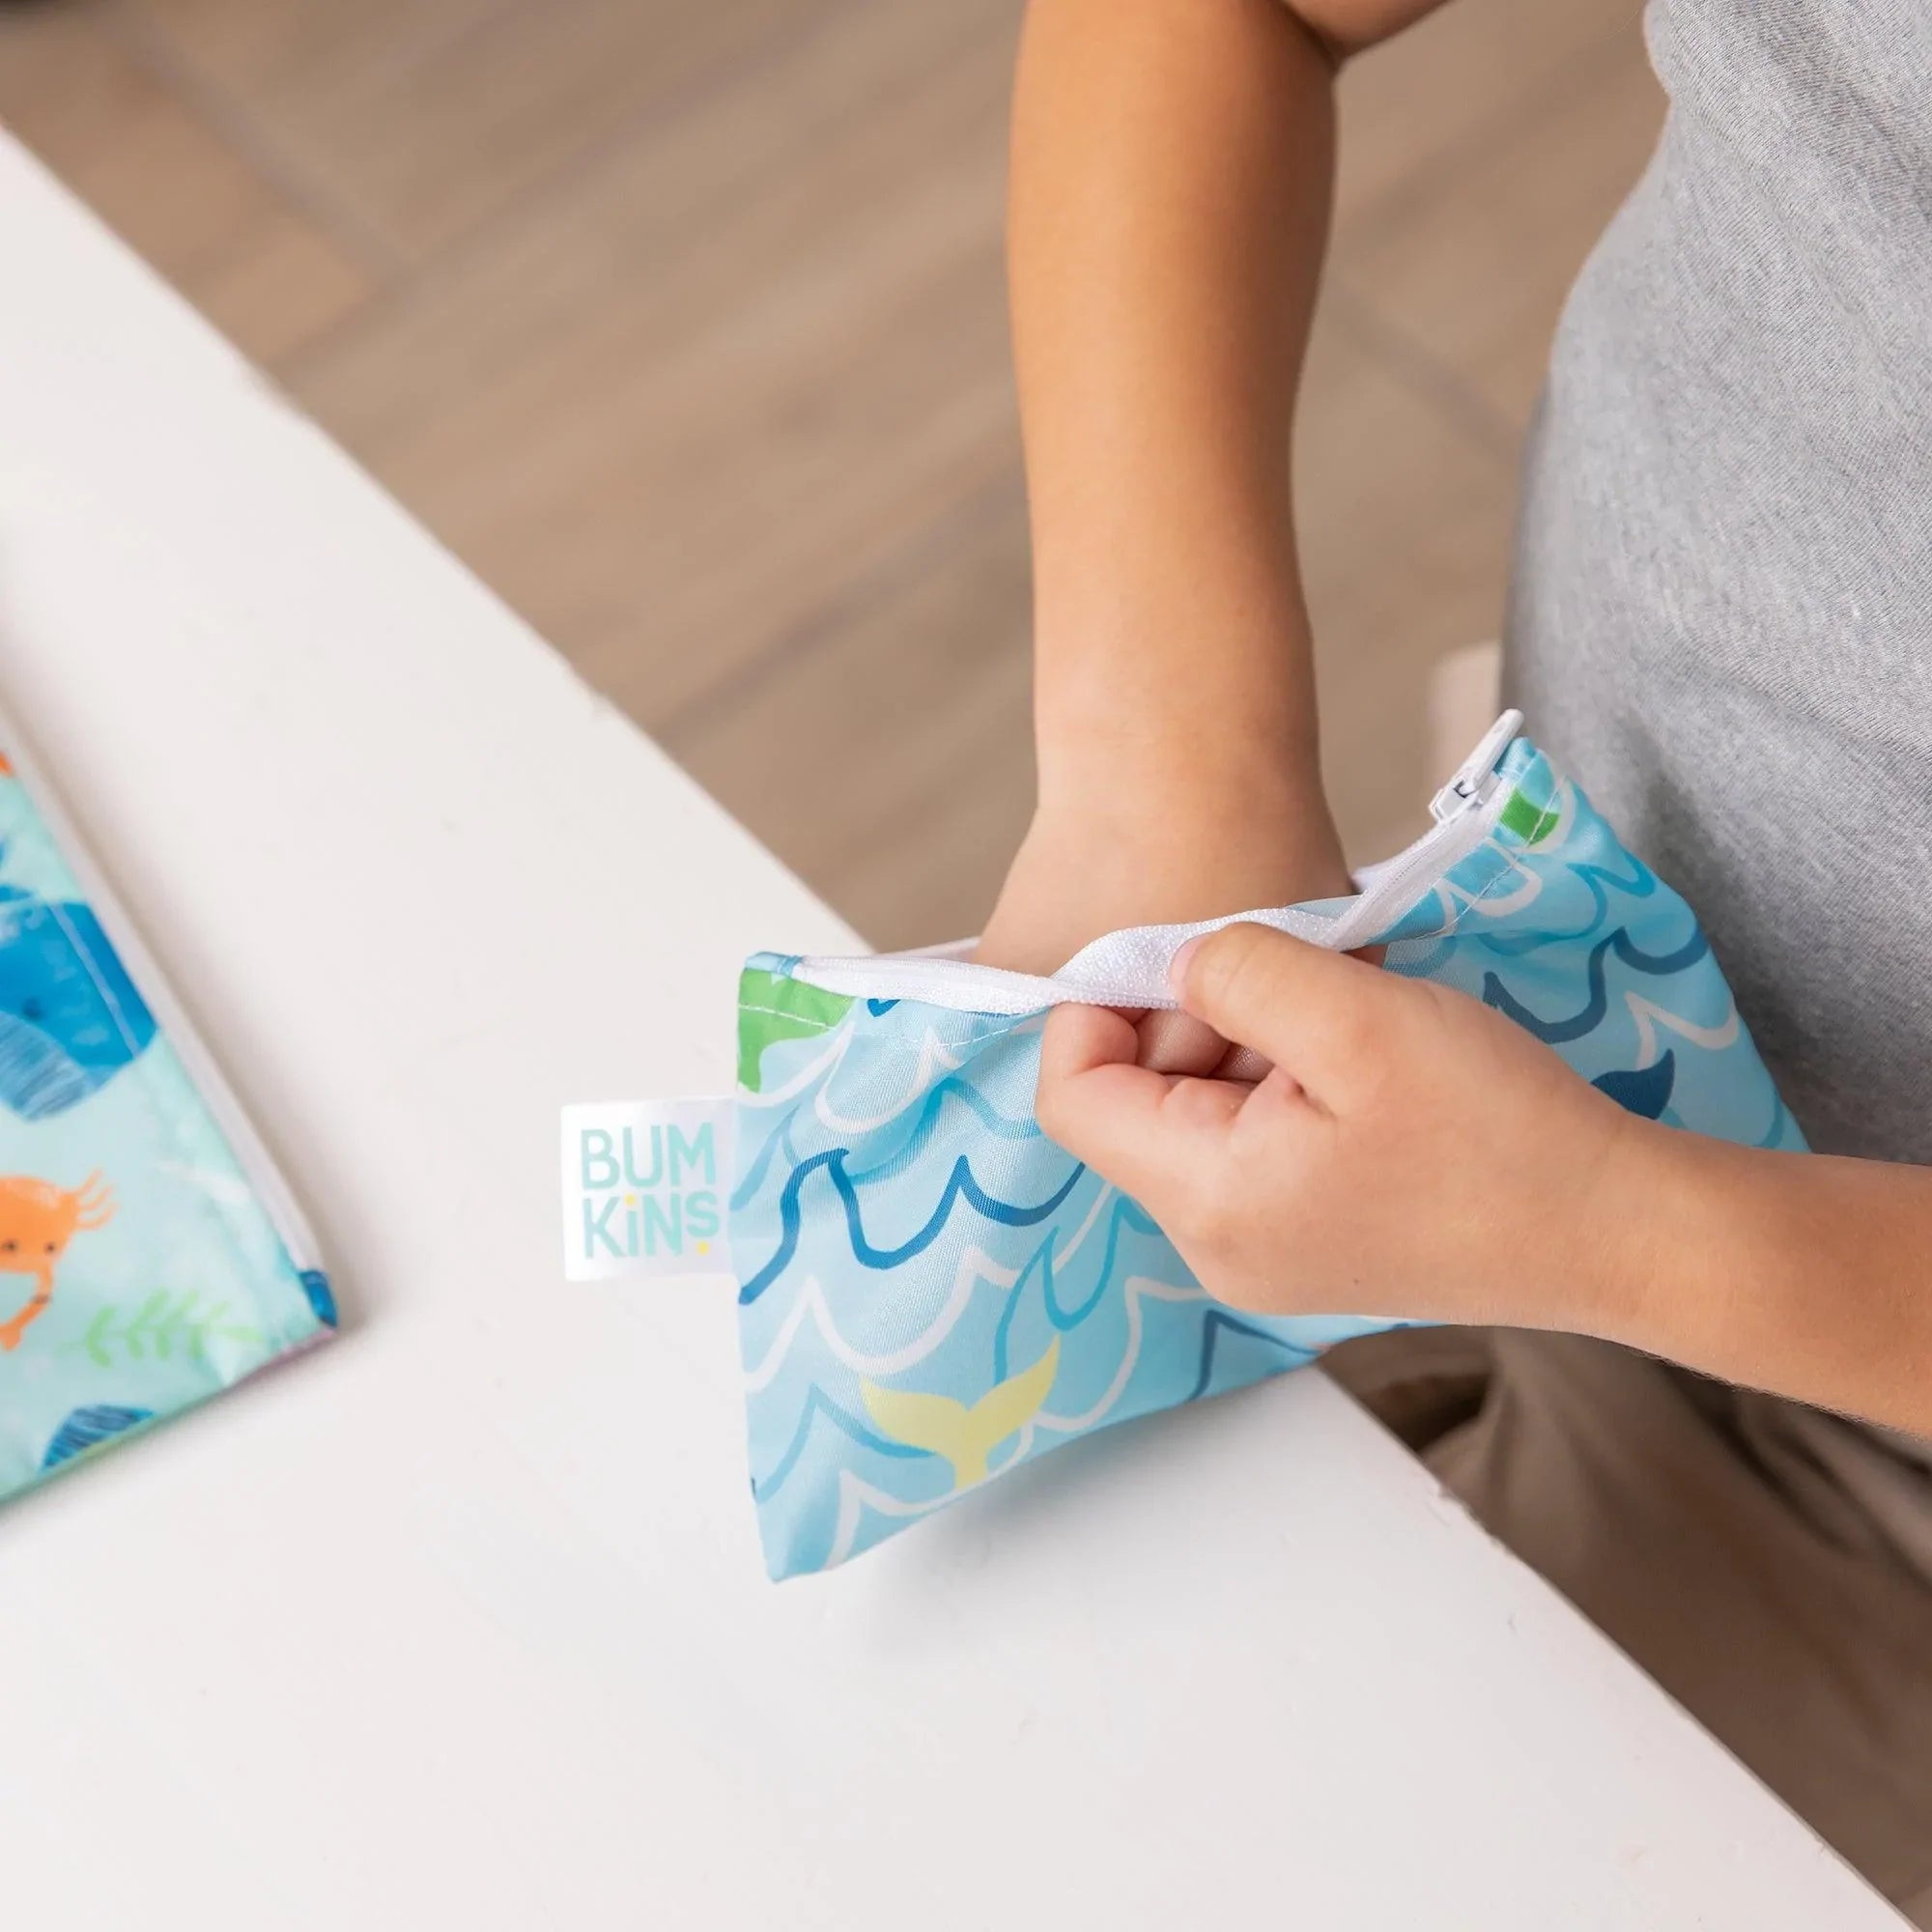 Bumkins Reusable Snack Bags Small Ocean Life & Whale Tail